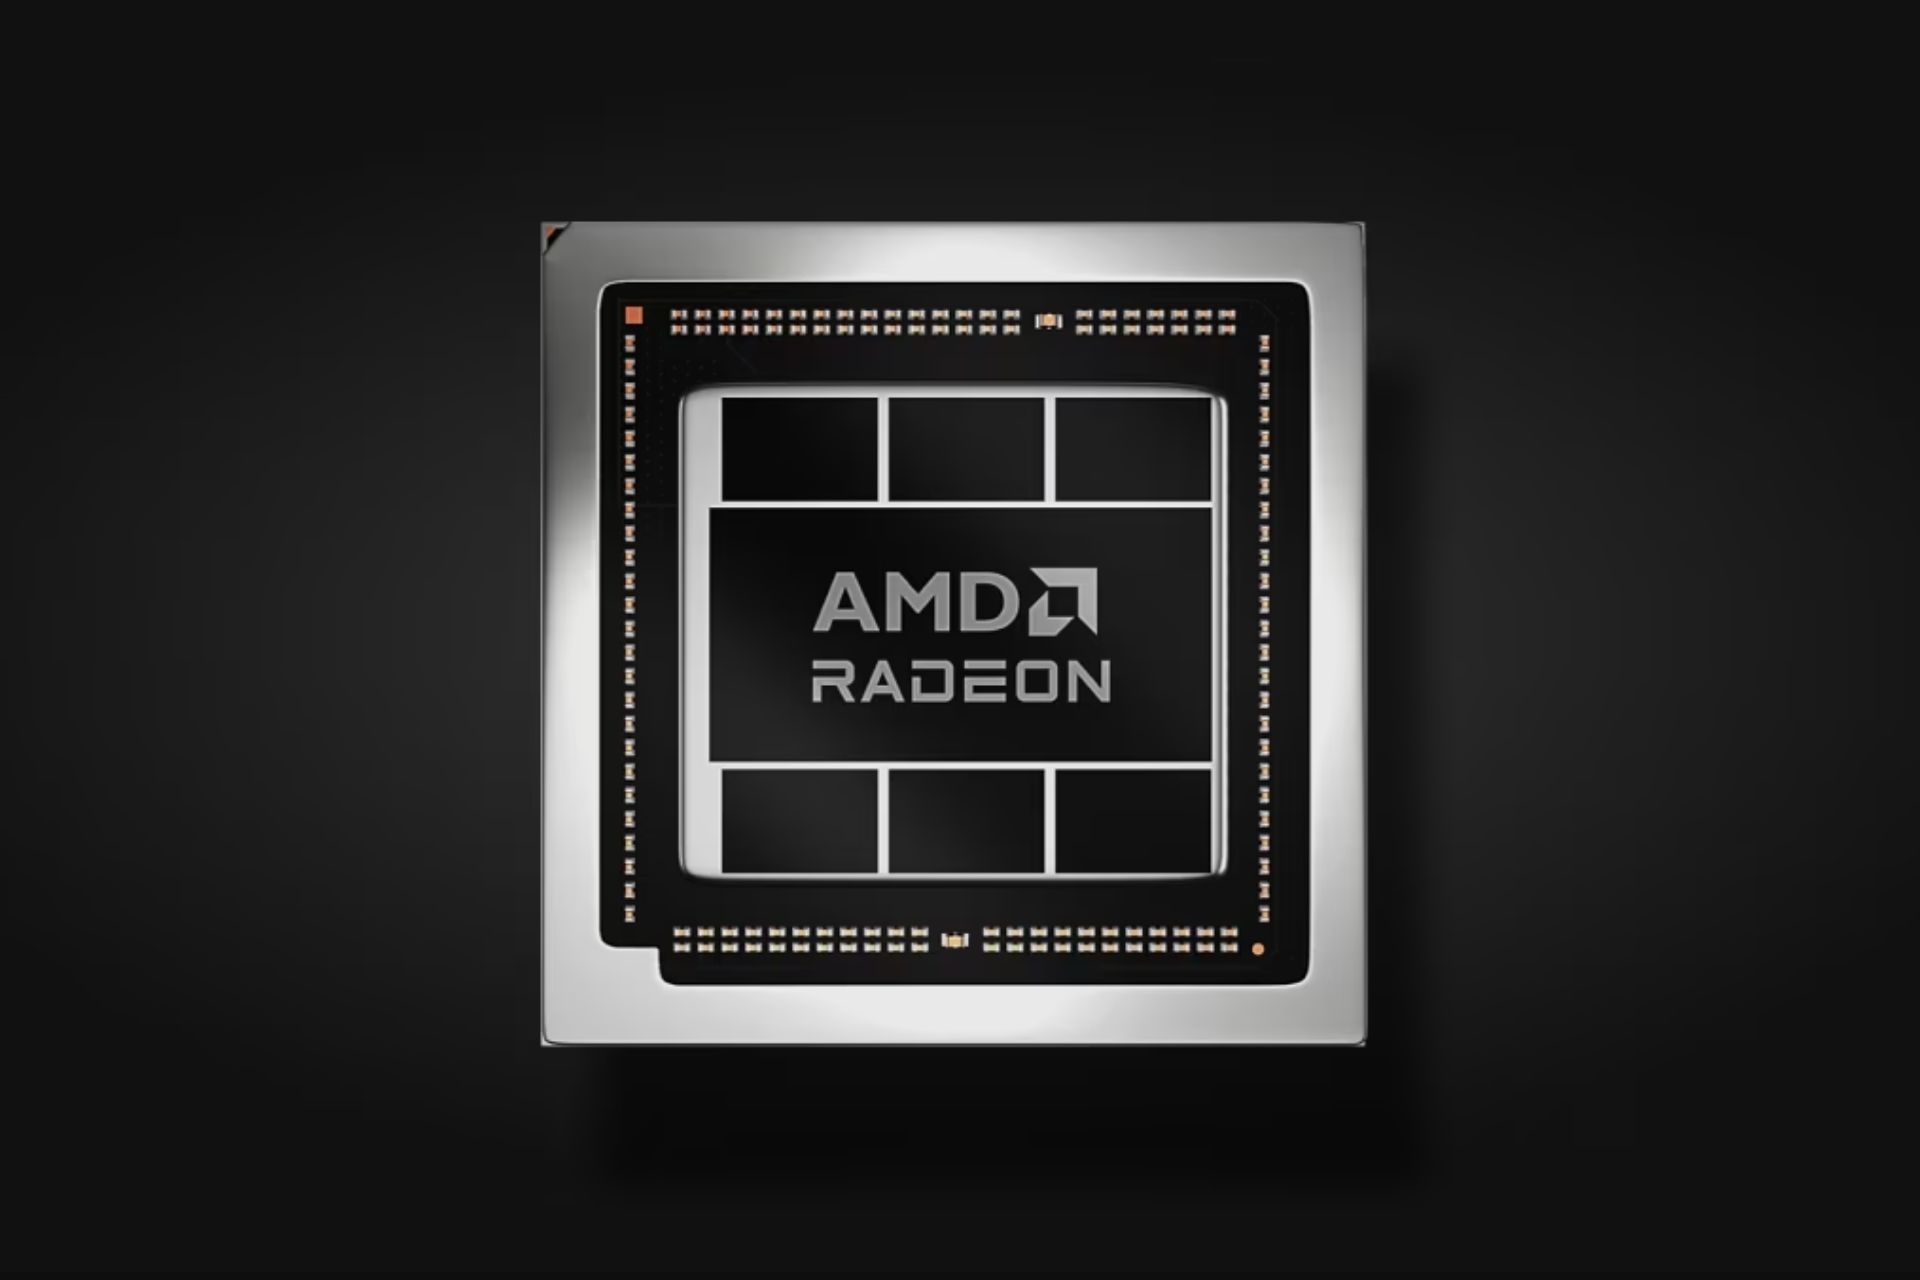 AMD Radeon RX 7900M is the fastest AMD GPU ever developed for laptops, says company